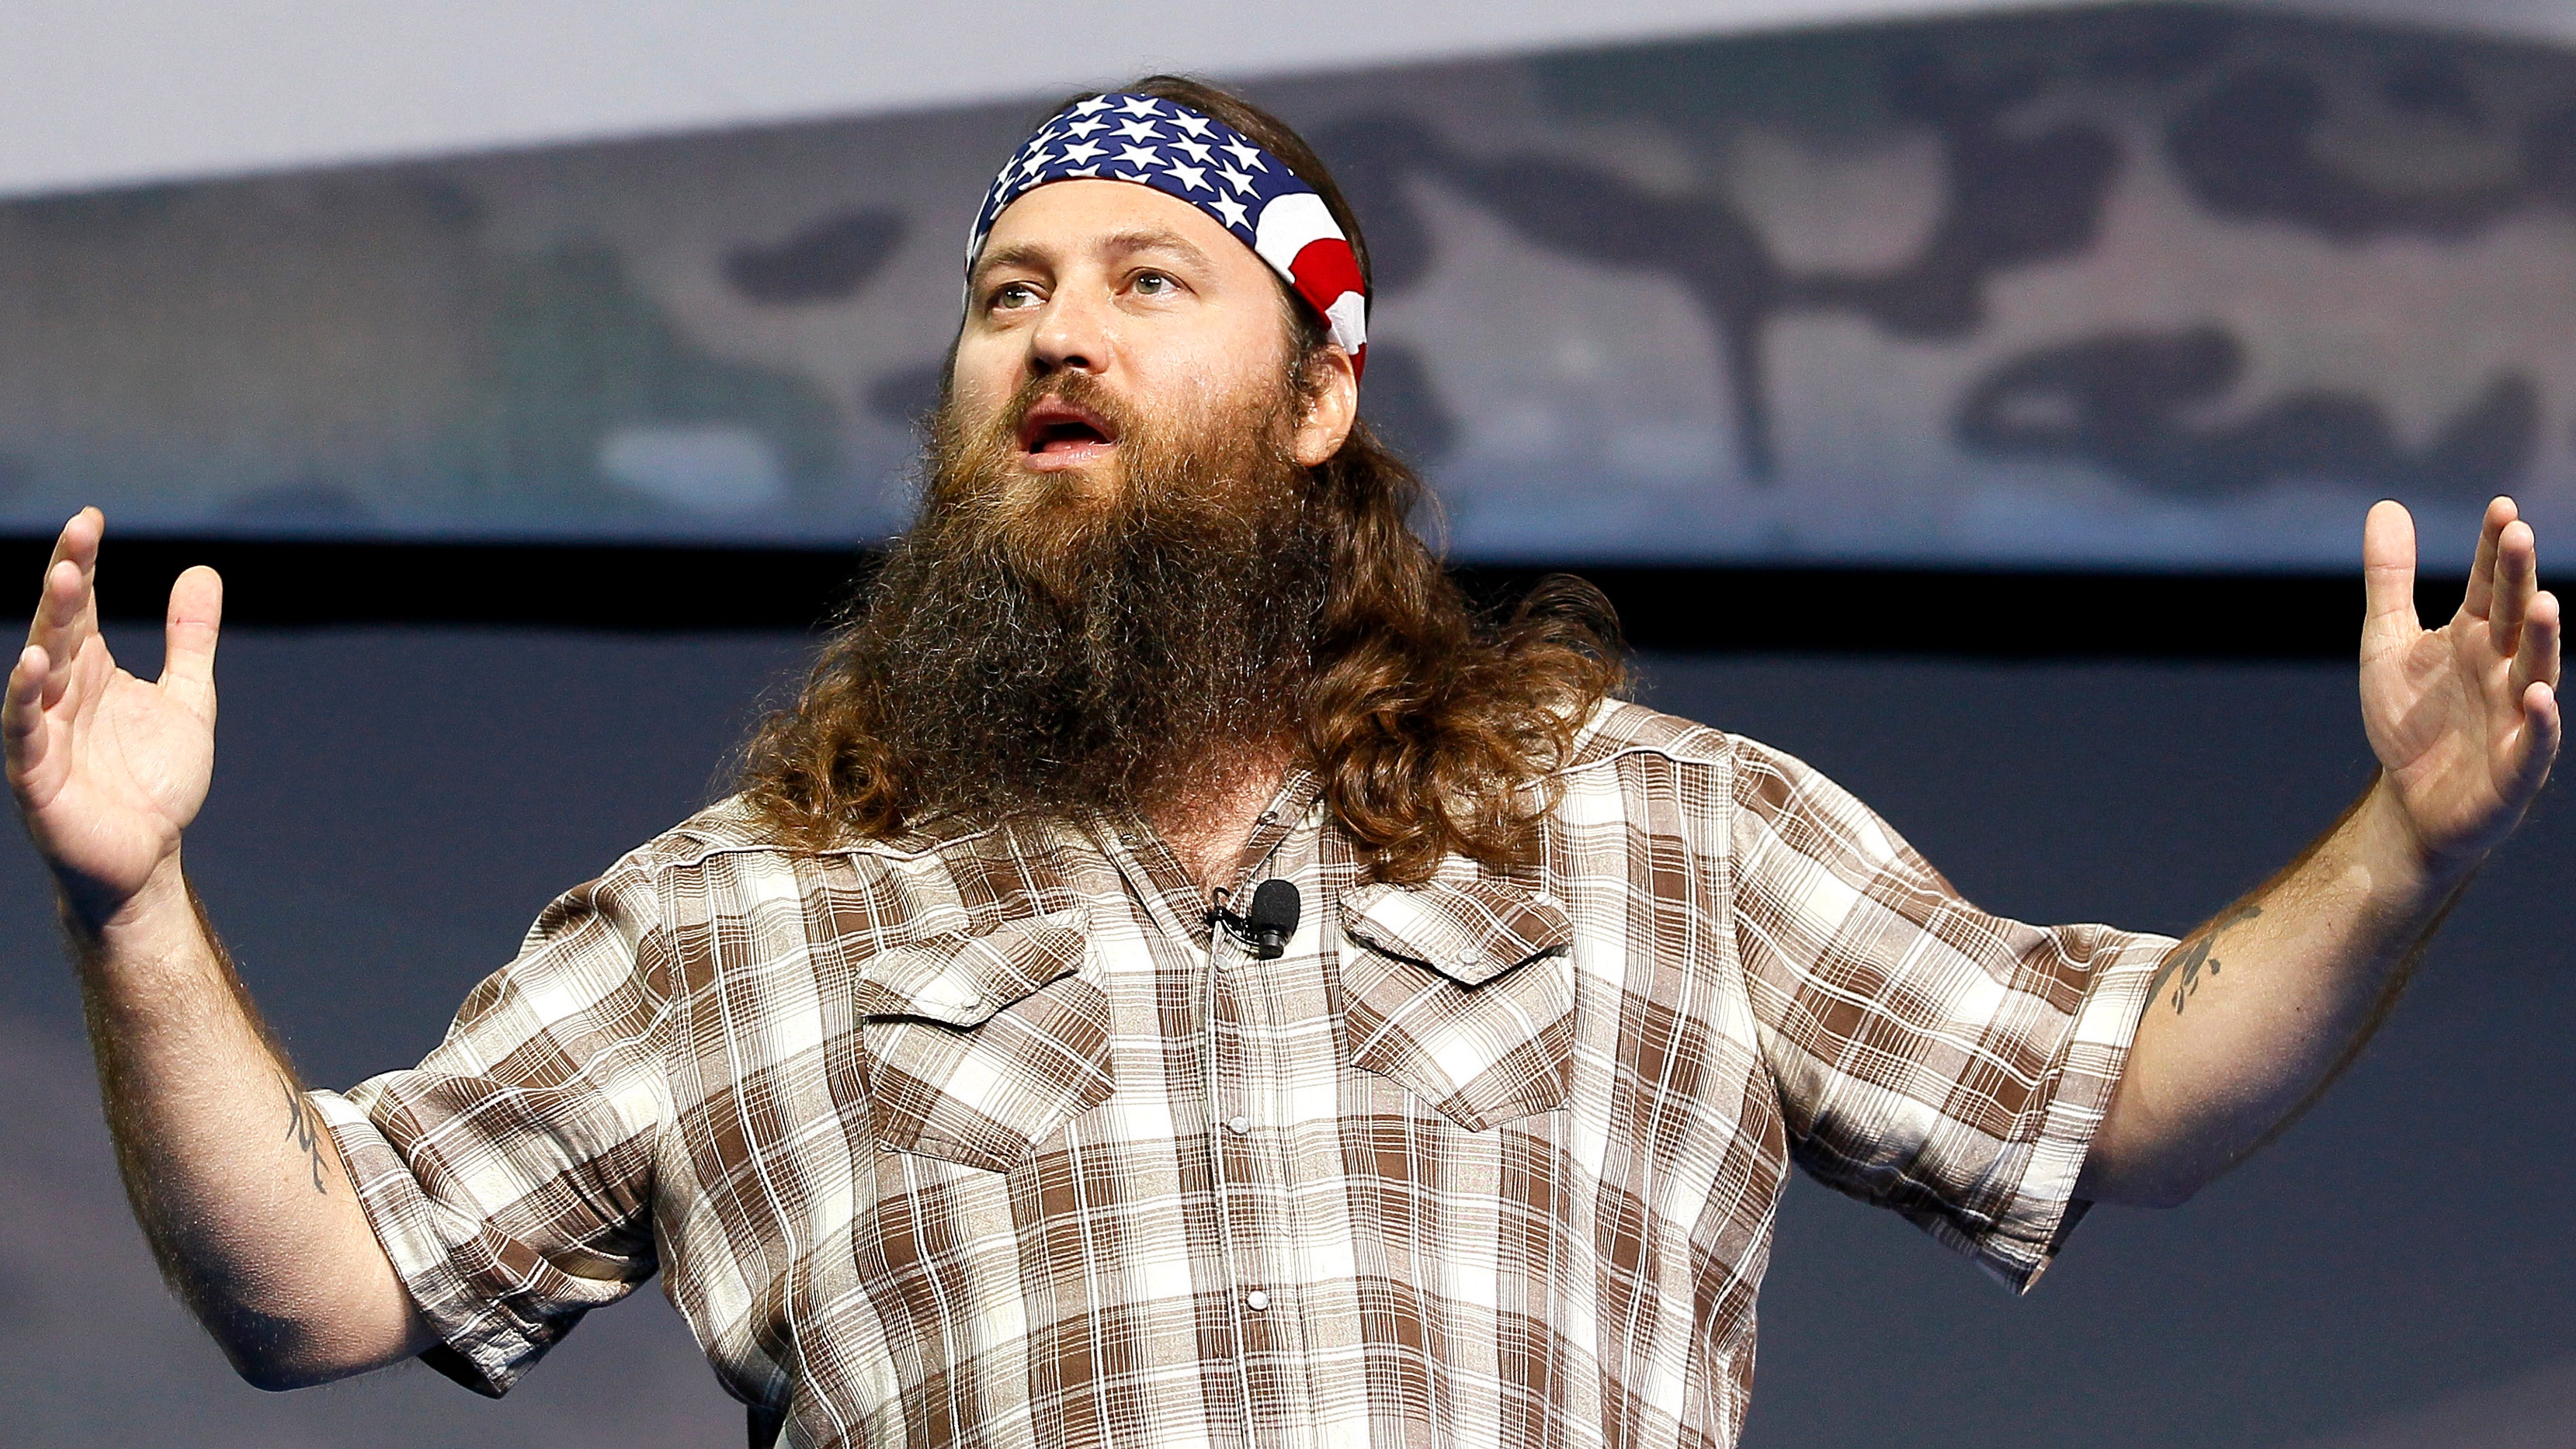 Willie Robertson says hell still stand during national anthem after conversation with NFL players Fox News